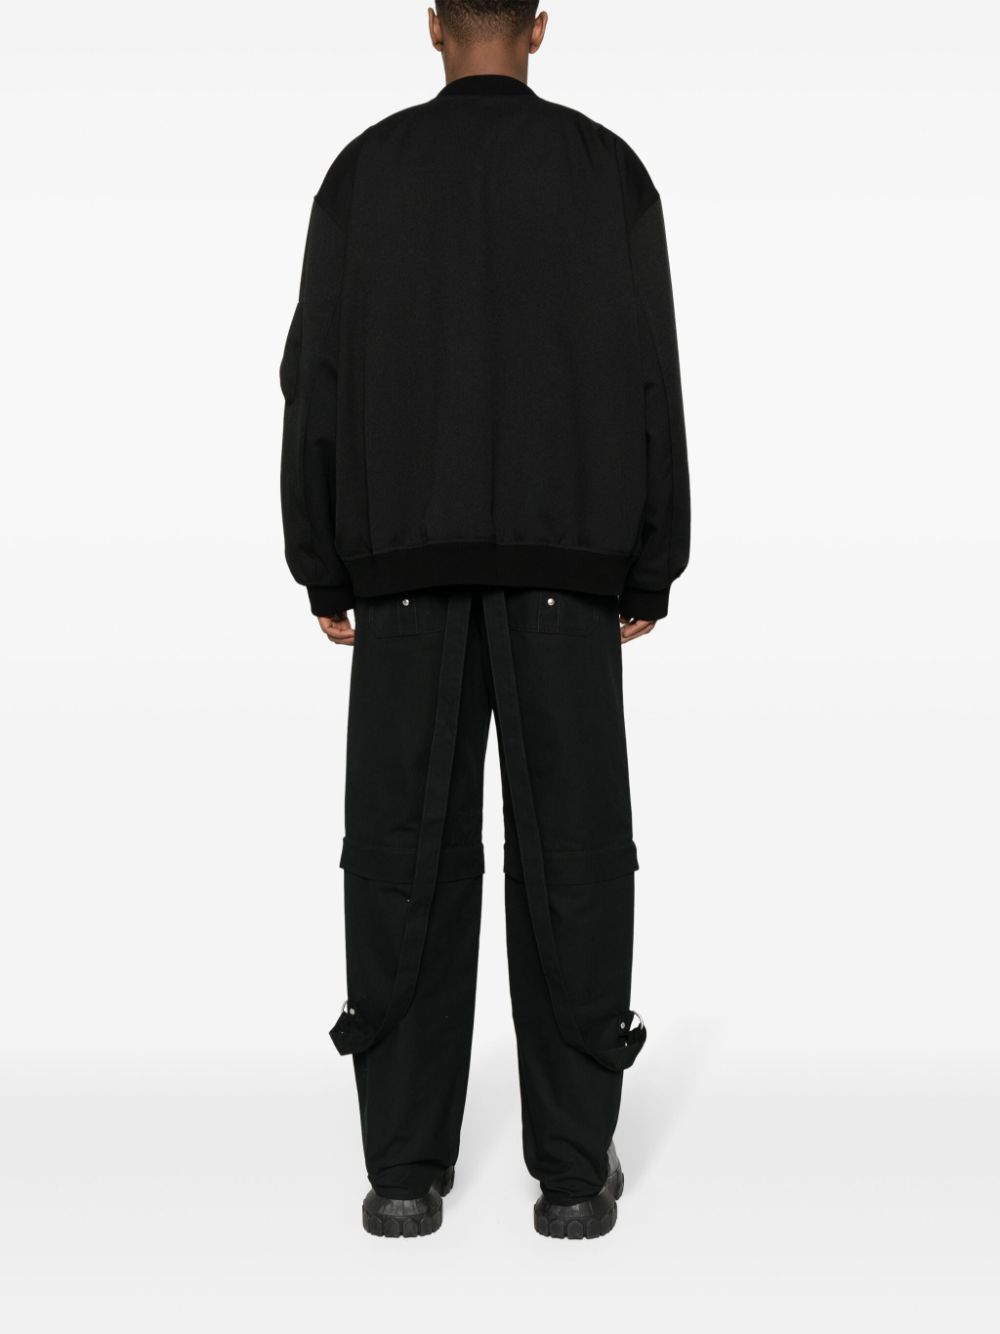 Givenchy Trousers Black